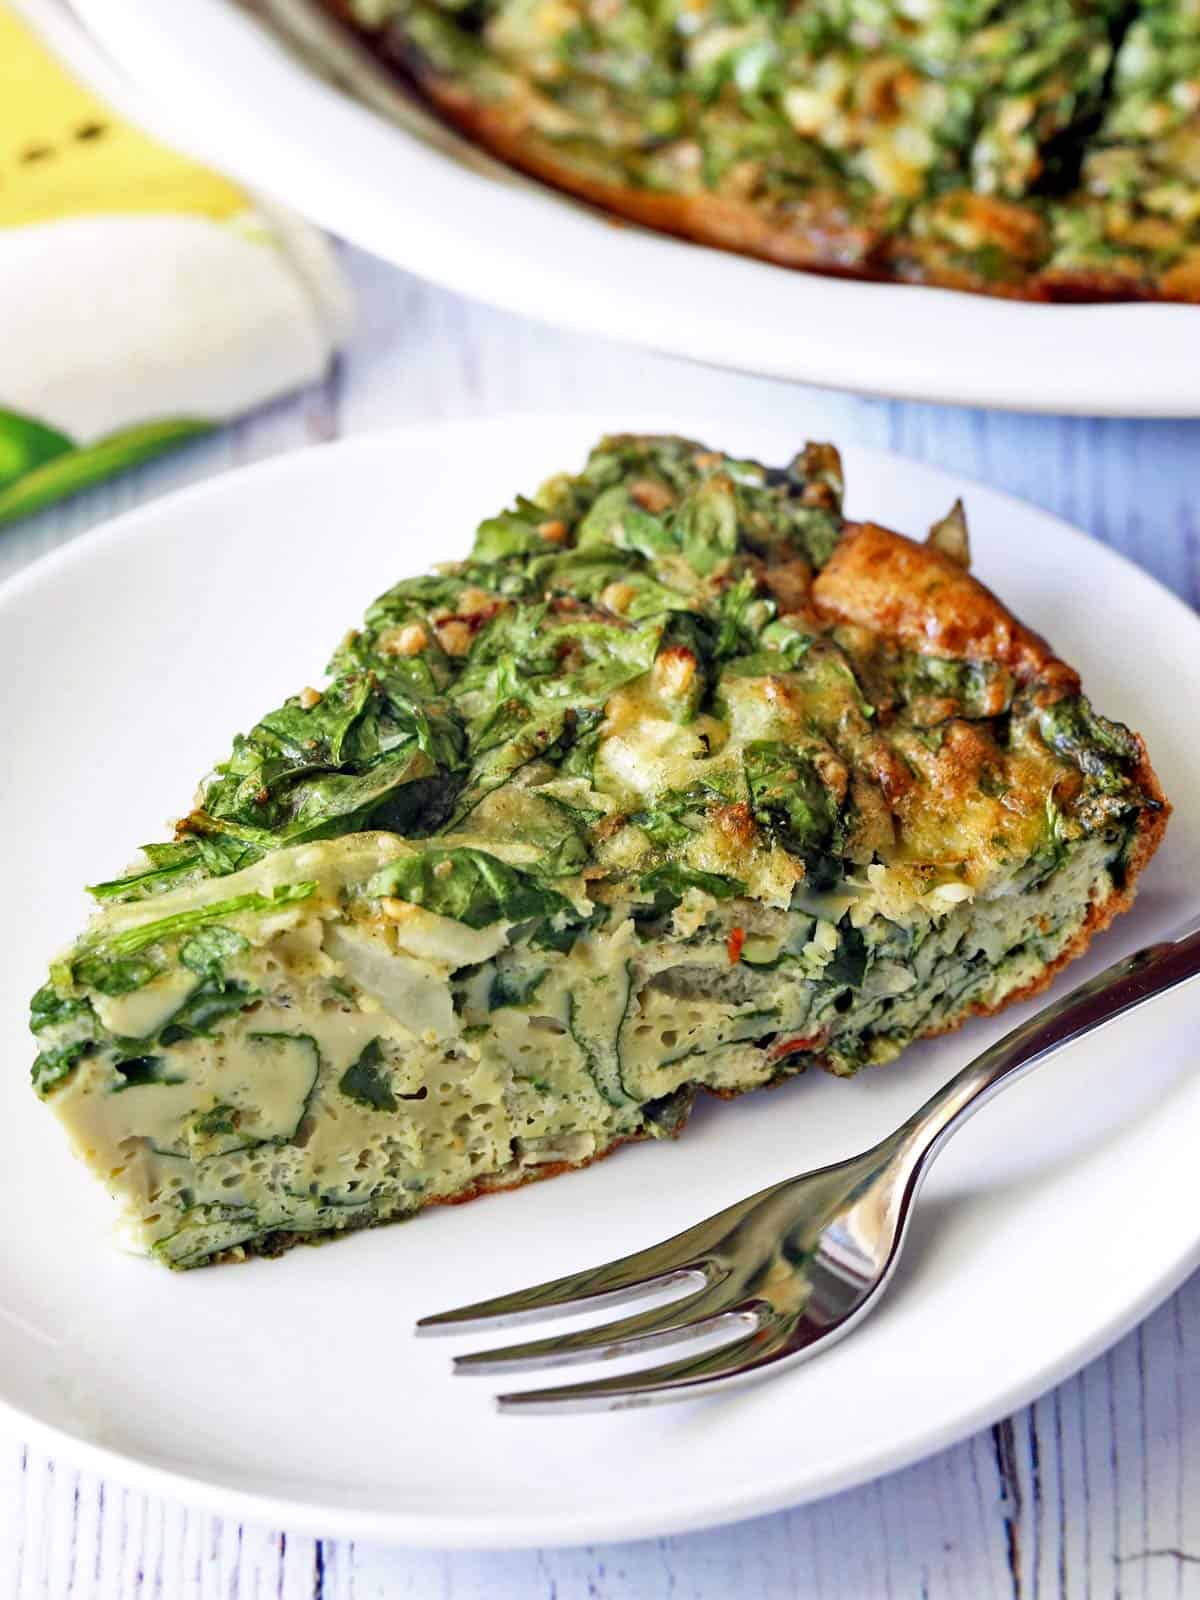 A slice of spinach frittata served on a plate with a fork.